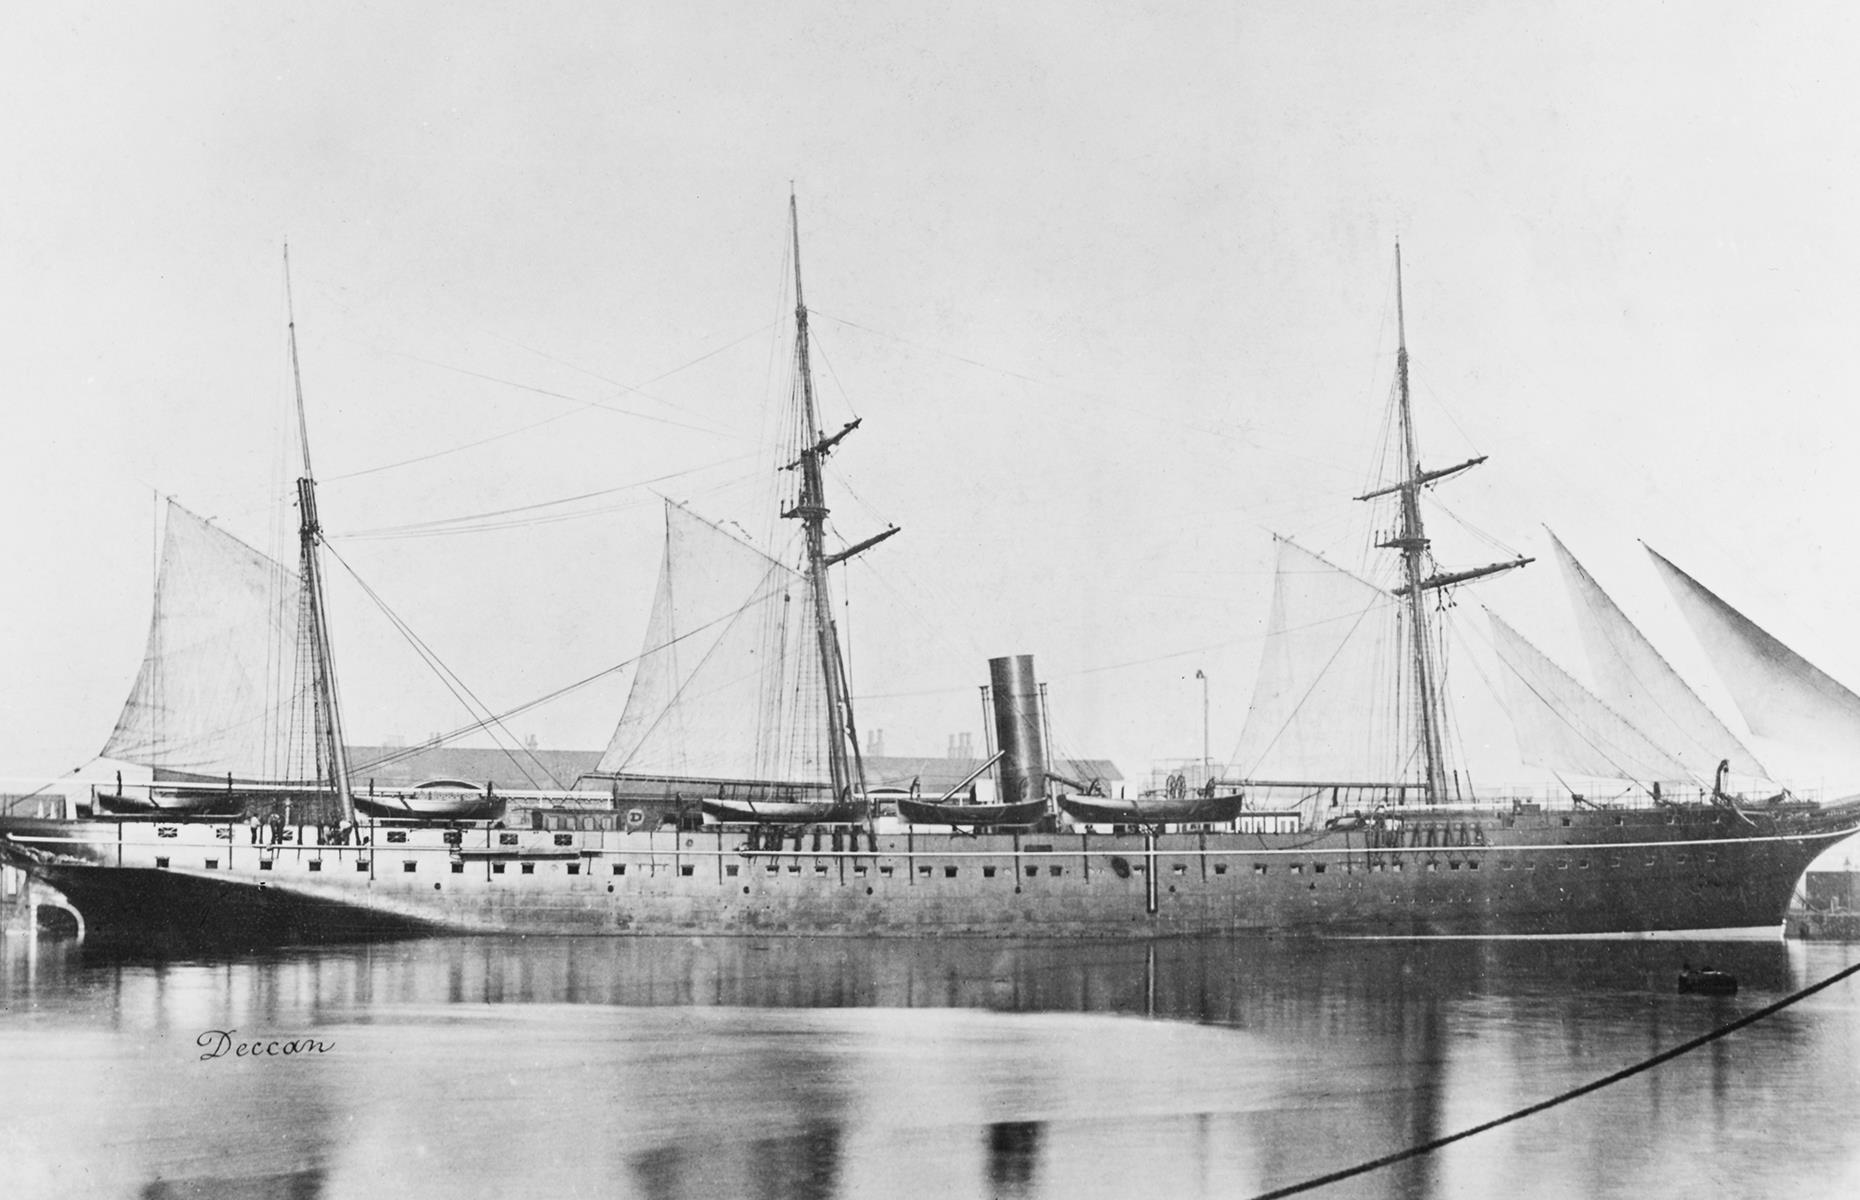 In the first half of the 19th century, most people crossed oceans for business rather than leisure – nevertheless, P&O is credited with launching the first pleasure cruises in this era. Boats bound for the Mediterranean struck out from England in 1844, with on-board passengers dreaming of sun, sand and sea. Pictured here is the P&O passenger liner SS Deccan sailing from Southampton a little later in 1870.